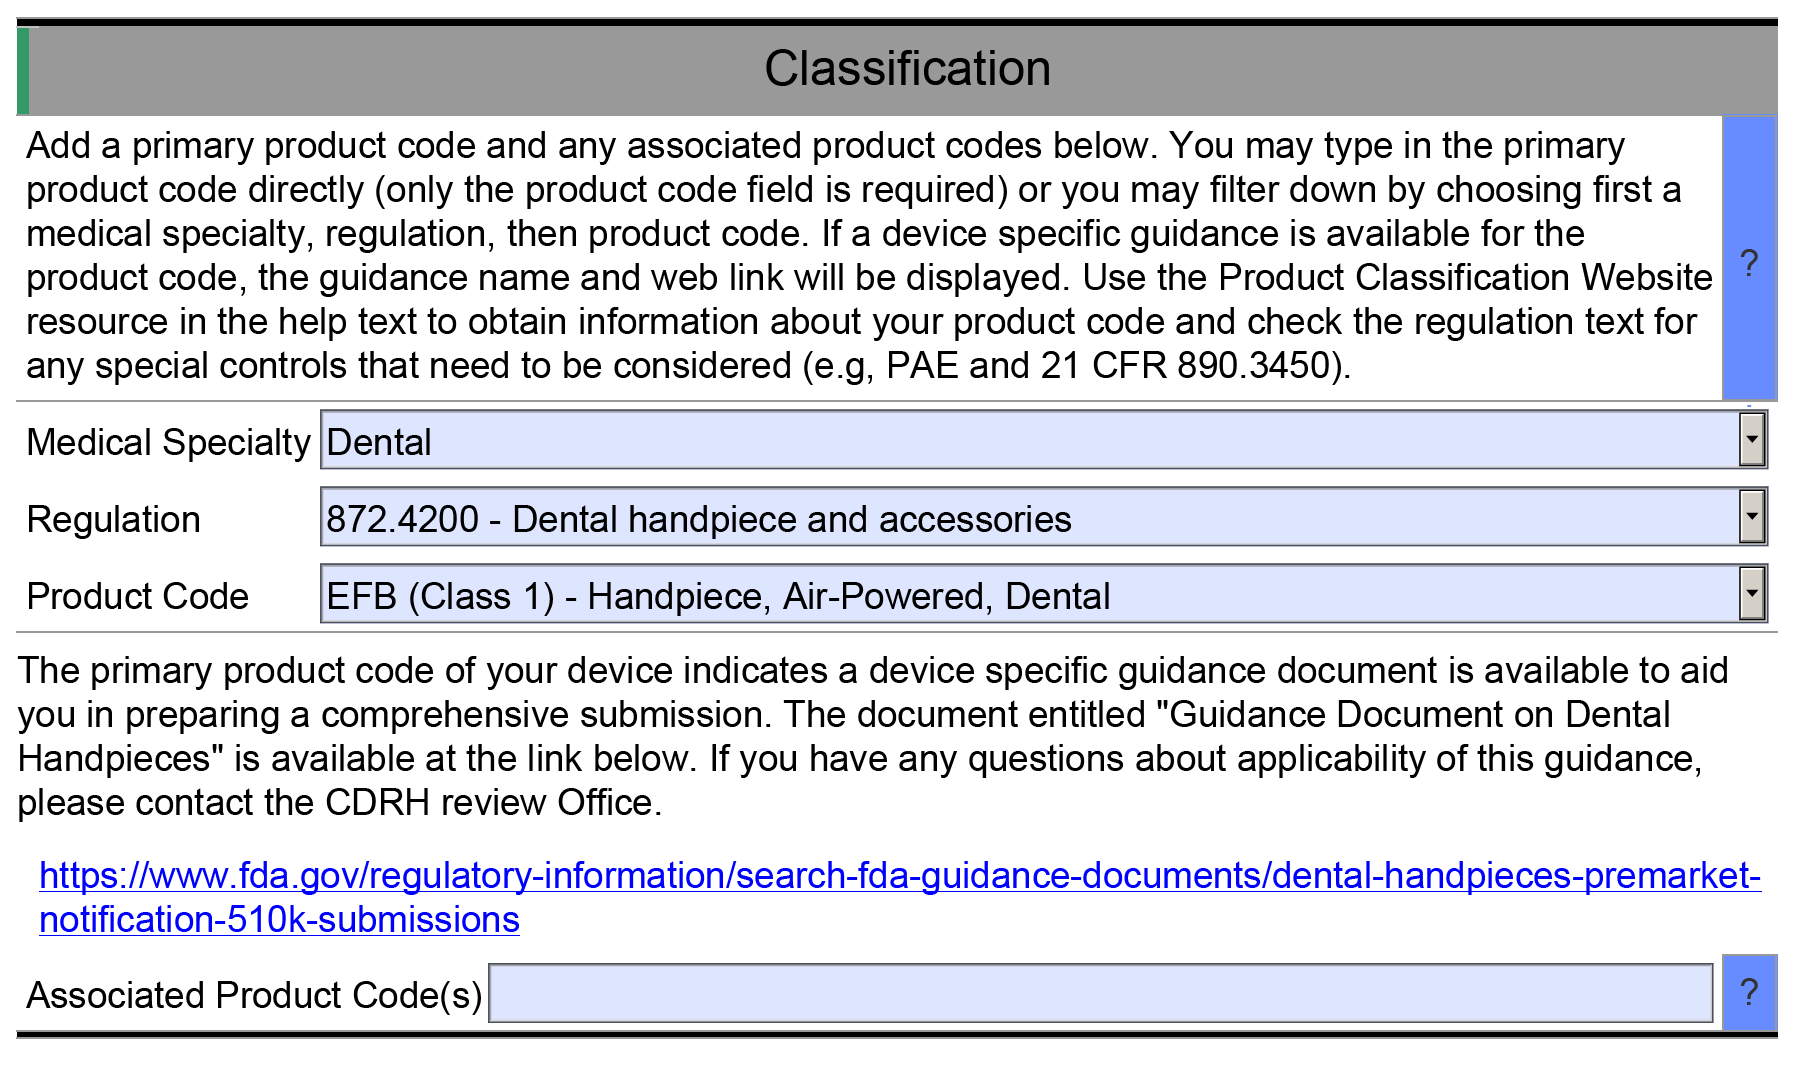 Classification Section - Medical Device Academy